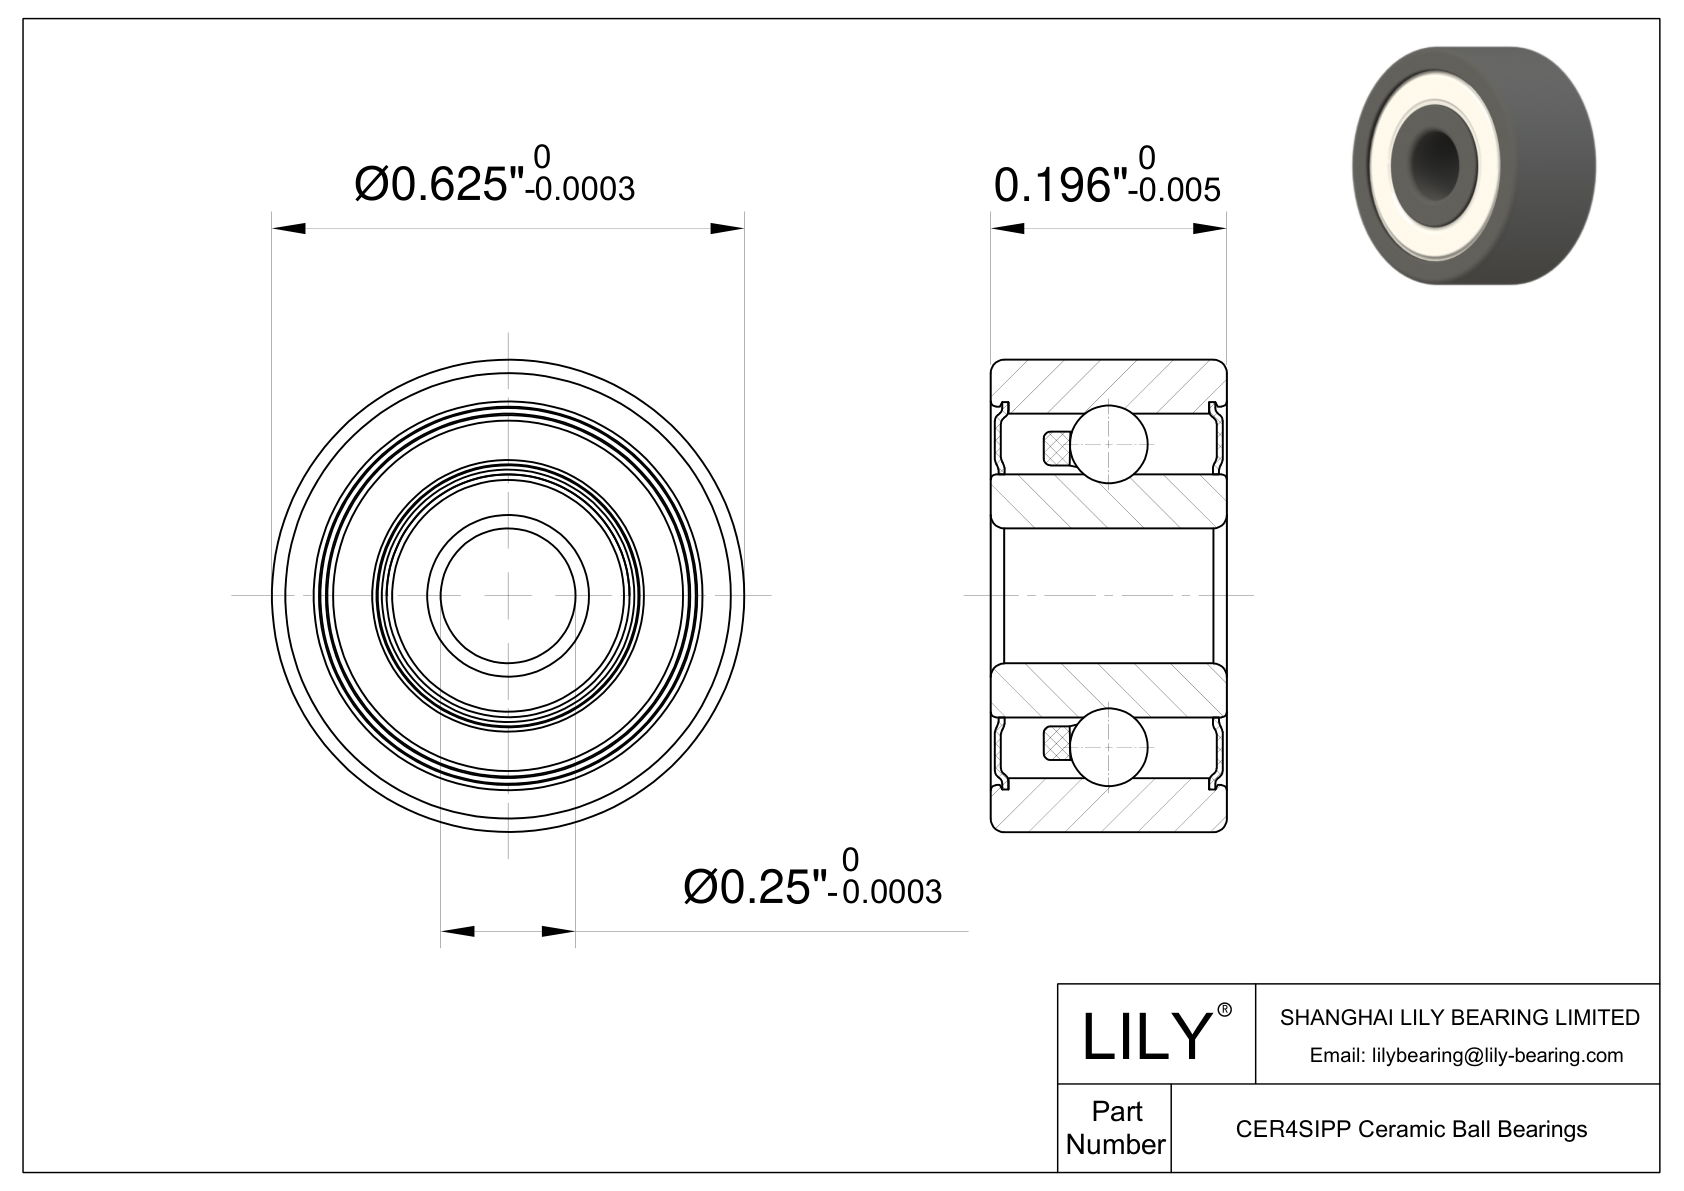 CESI R4 2RS Inch Size Silicon Nitride Ceramic Bearings cad drawing